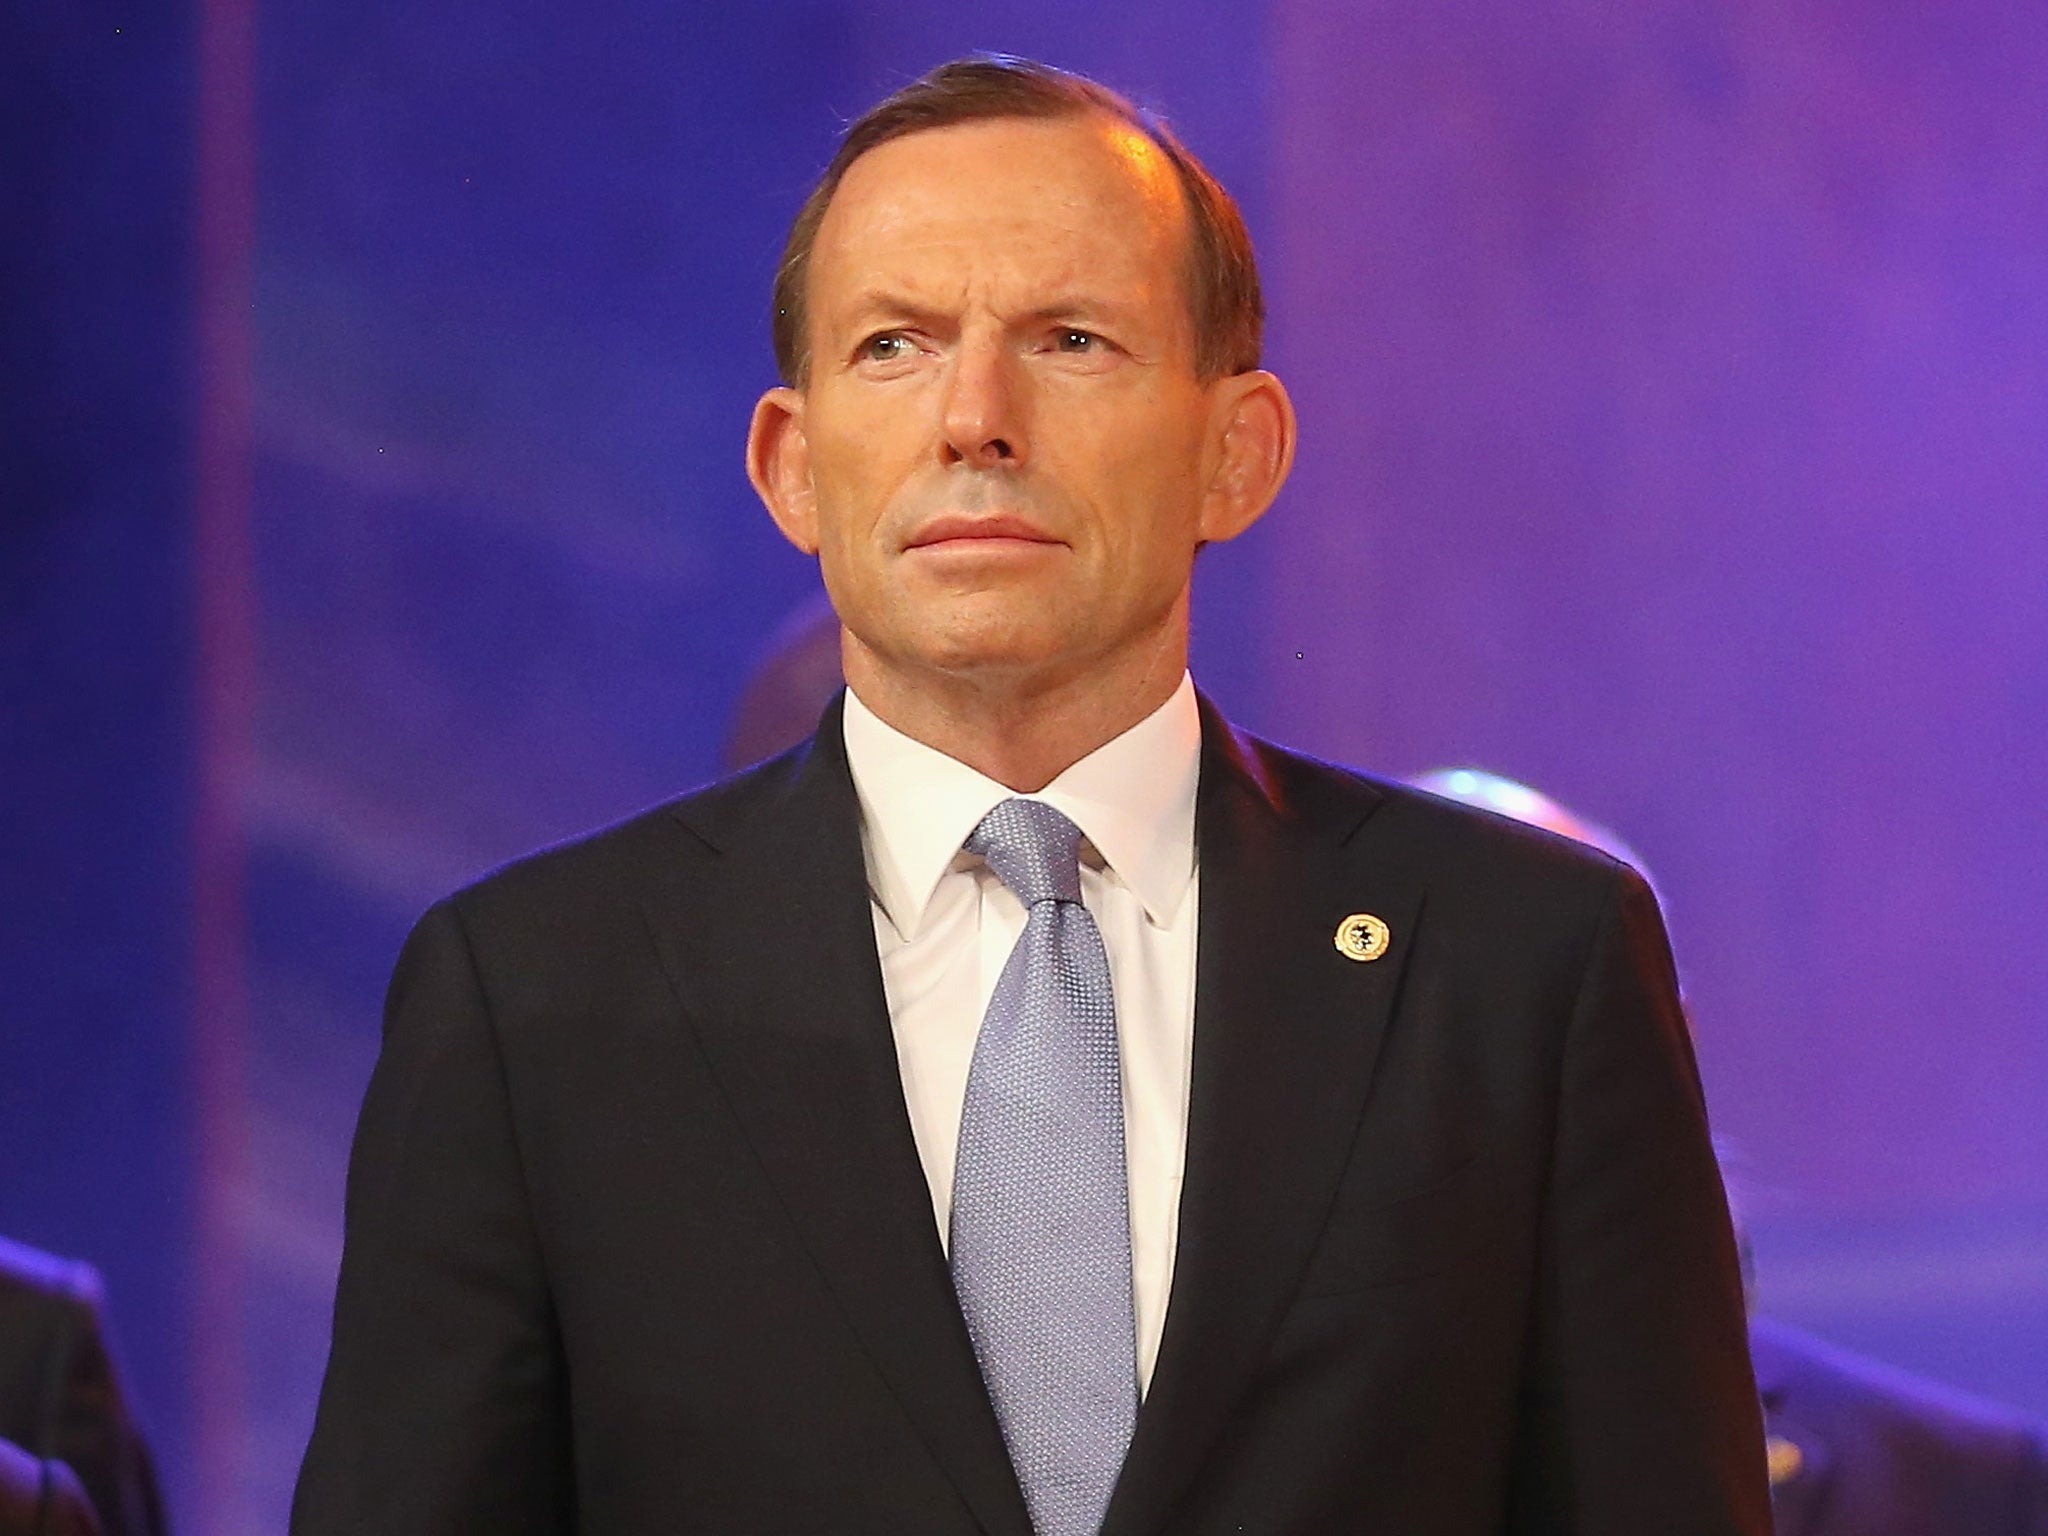 Australian Prime Minister Tony Abbott promised to support the timber industry in a speech on Tuesday